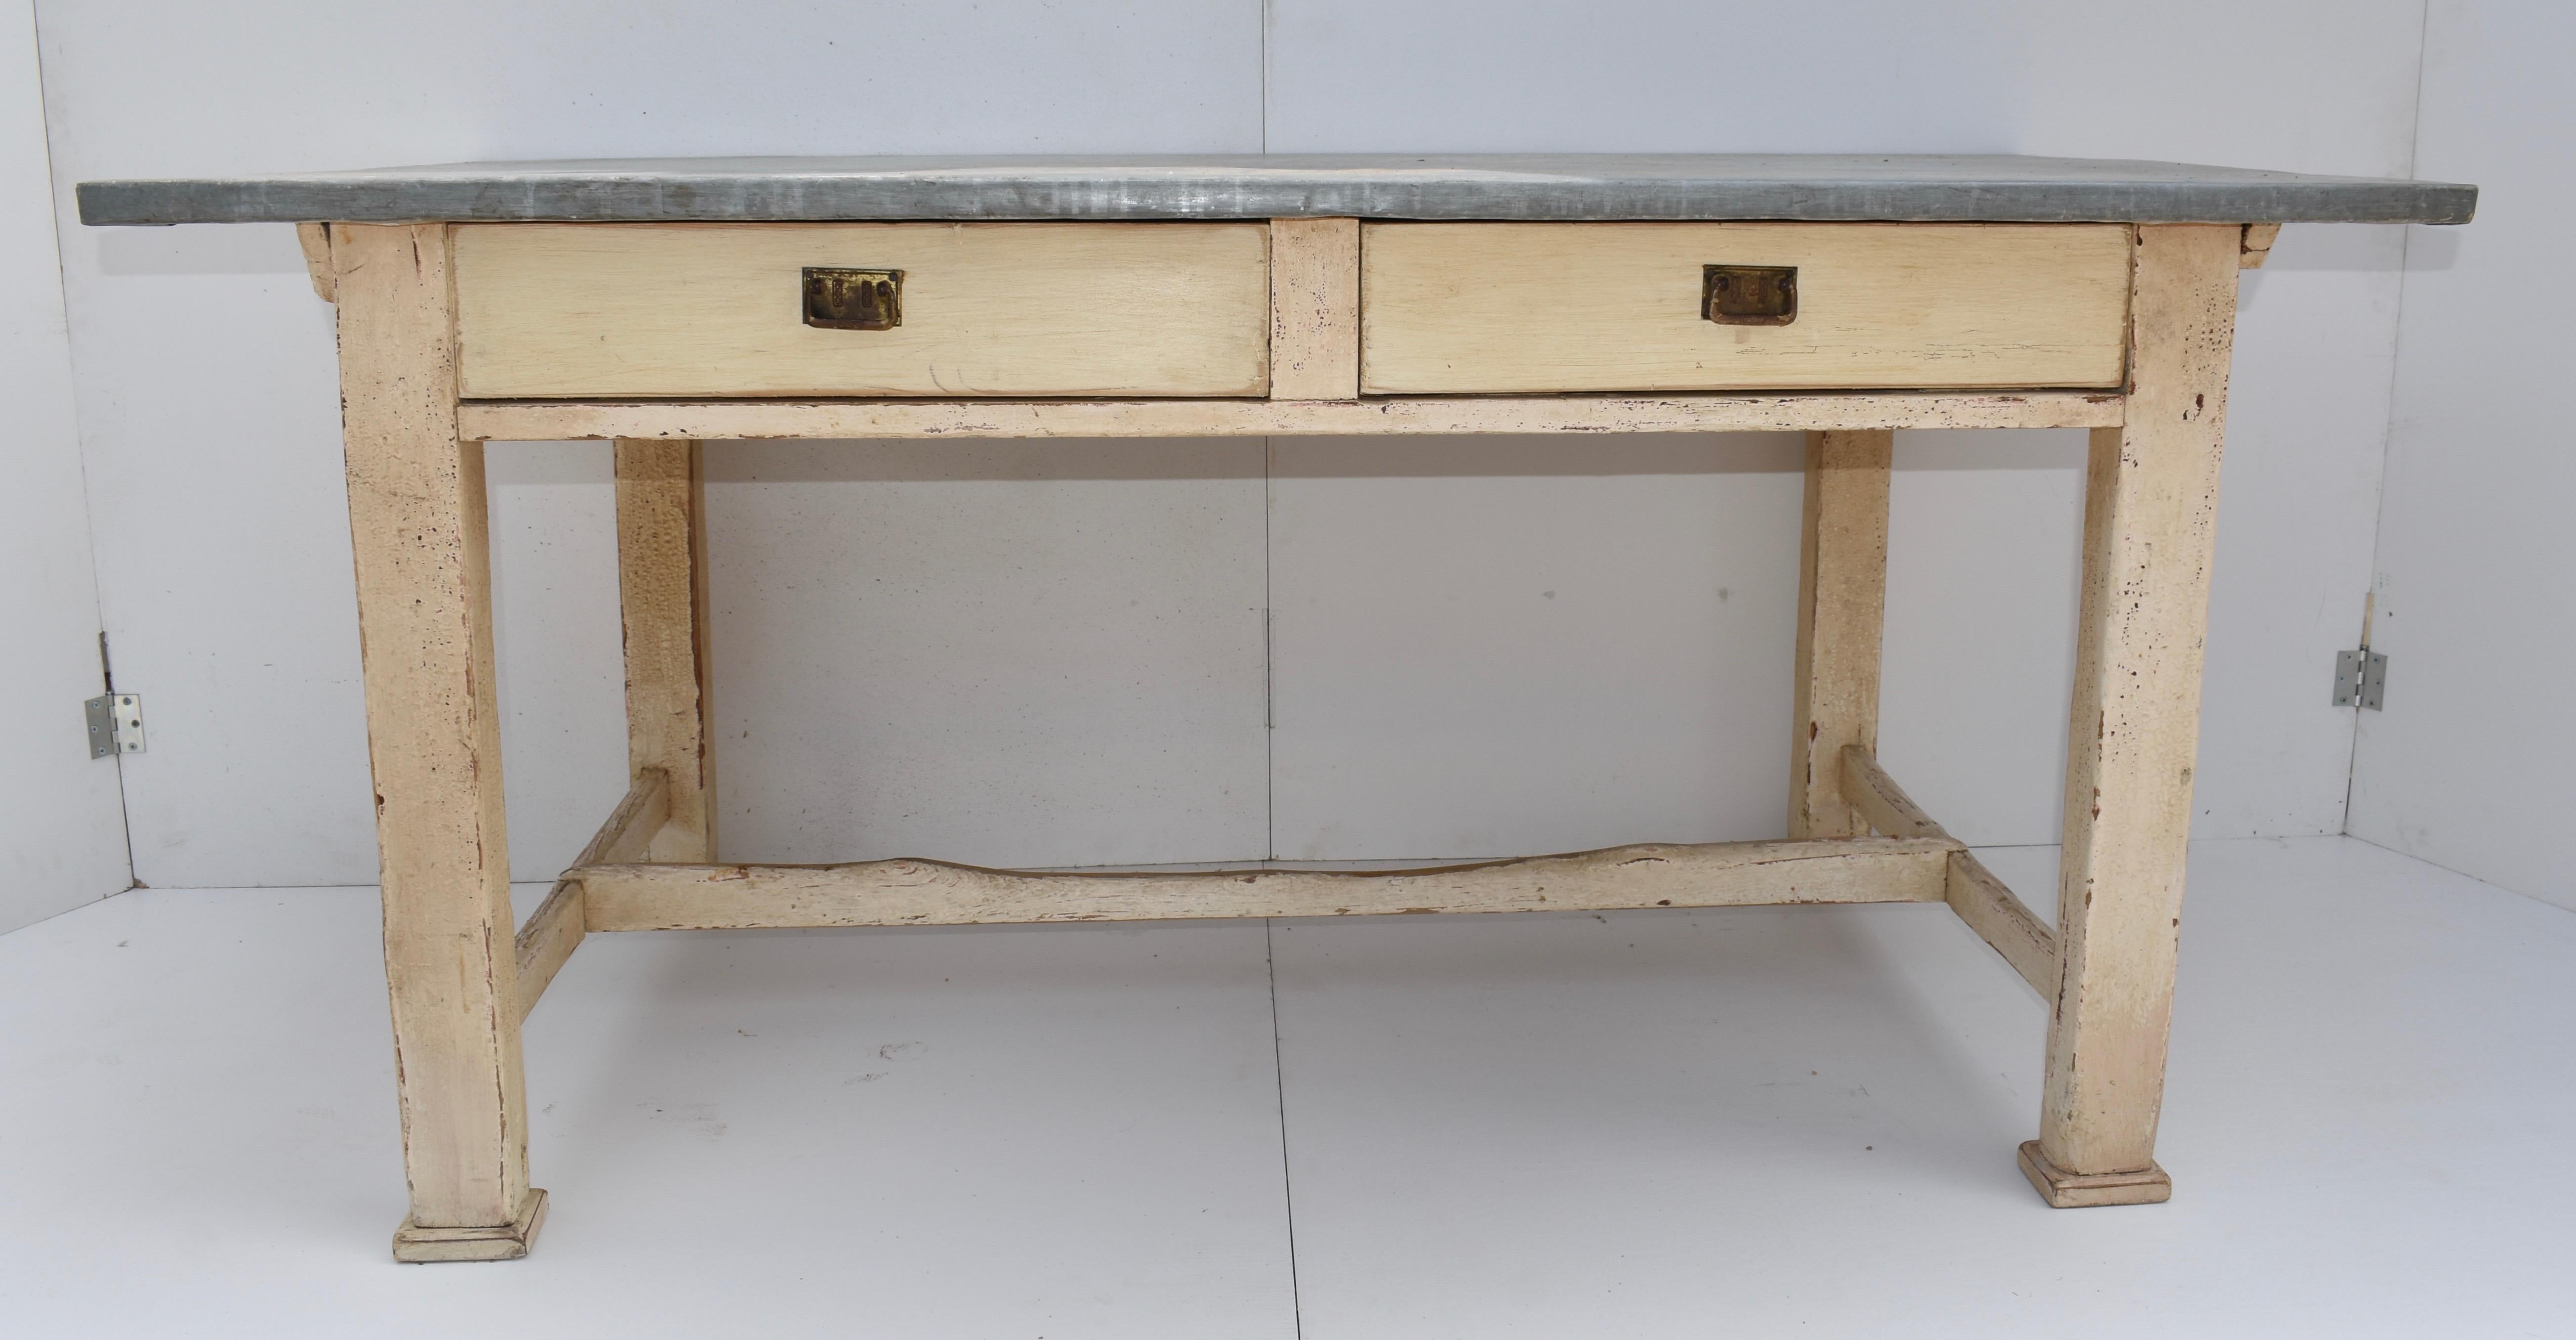 This sturdy zinc-topped work table has two large handcut dovetailed drawers with metal bail pulls and square legs joined by stretchers. Zinc-topped tables were frequently used for folding and sorting clothing and linens during laundering. From the